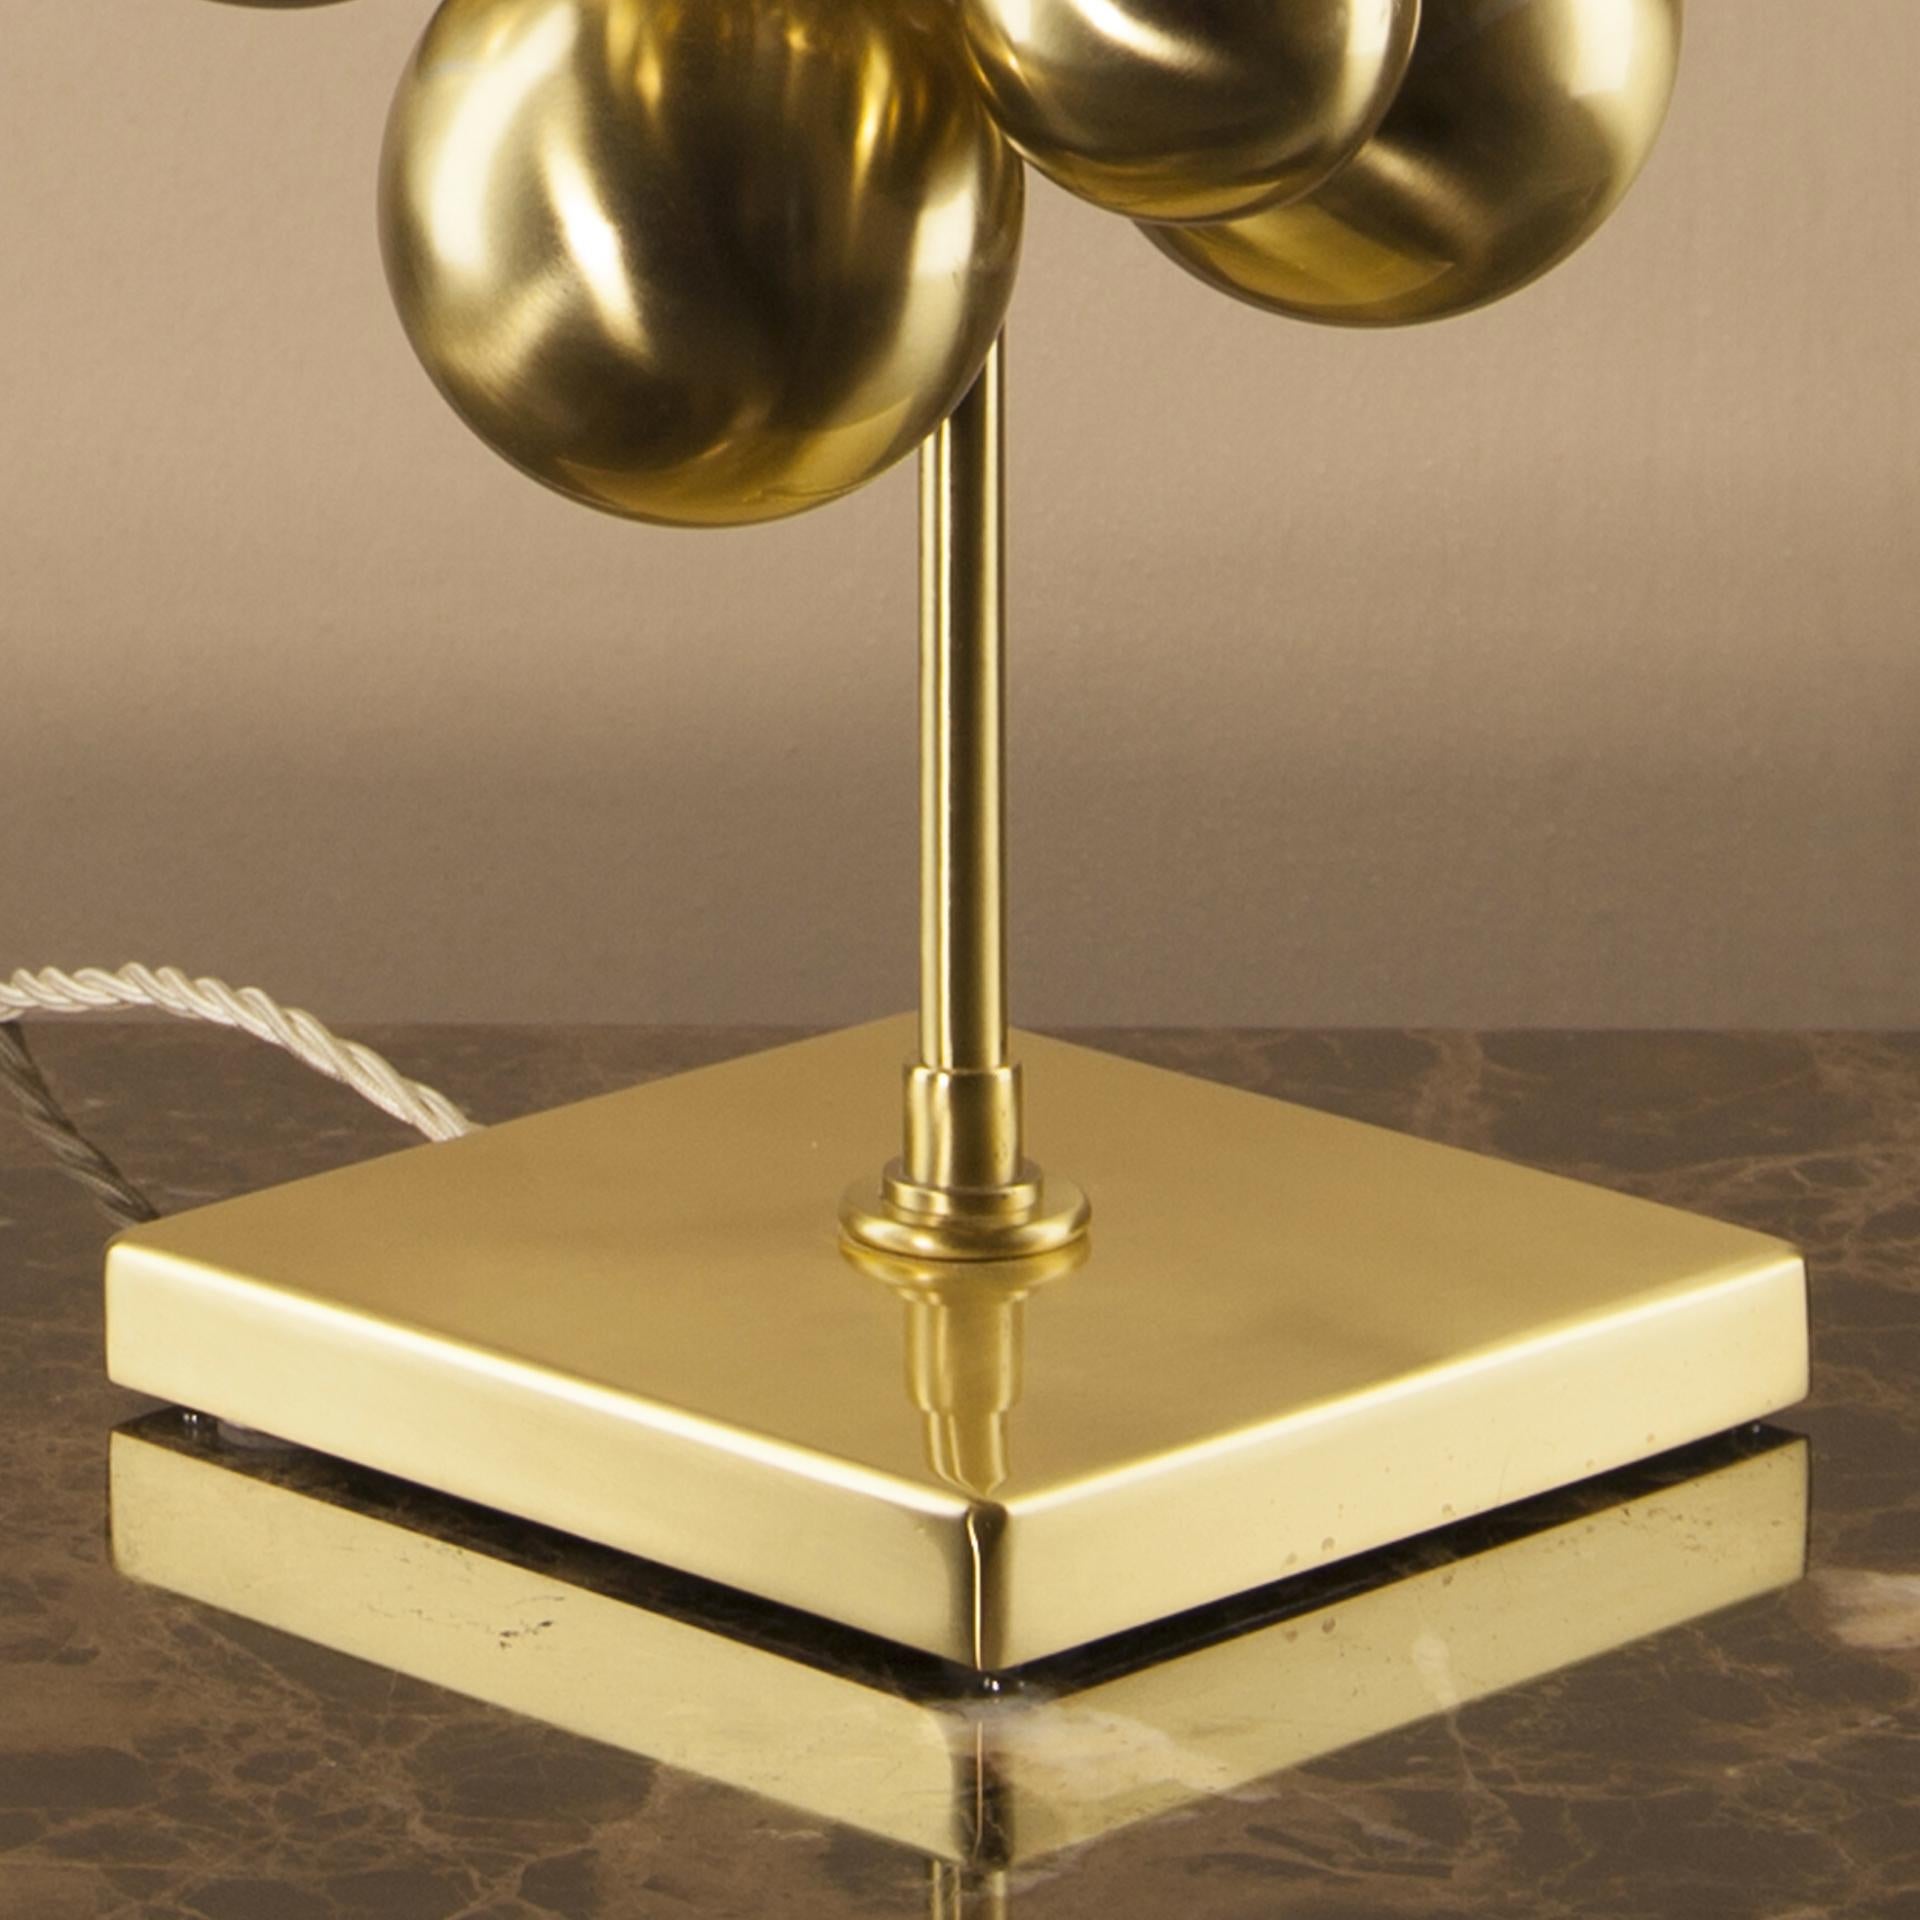 Plutone Table Lamp, Solid Brass Spheres, Florence Italy Production For Sale 7